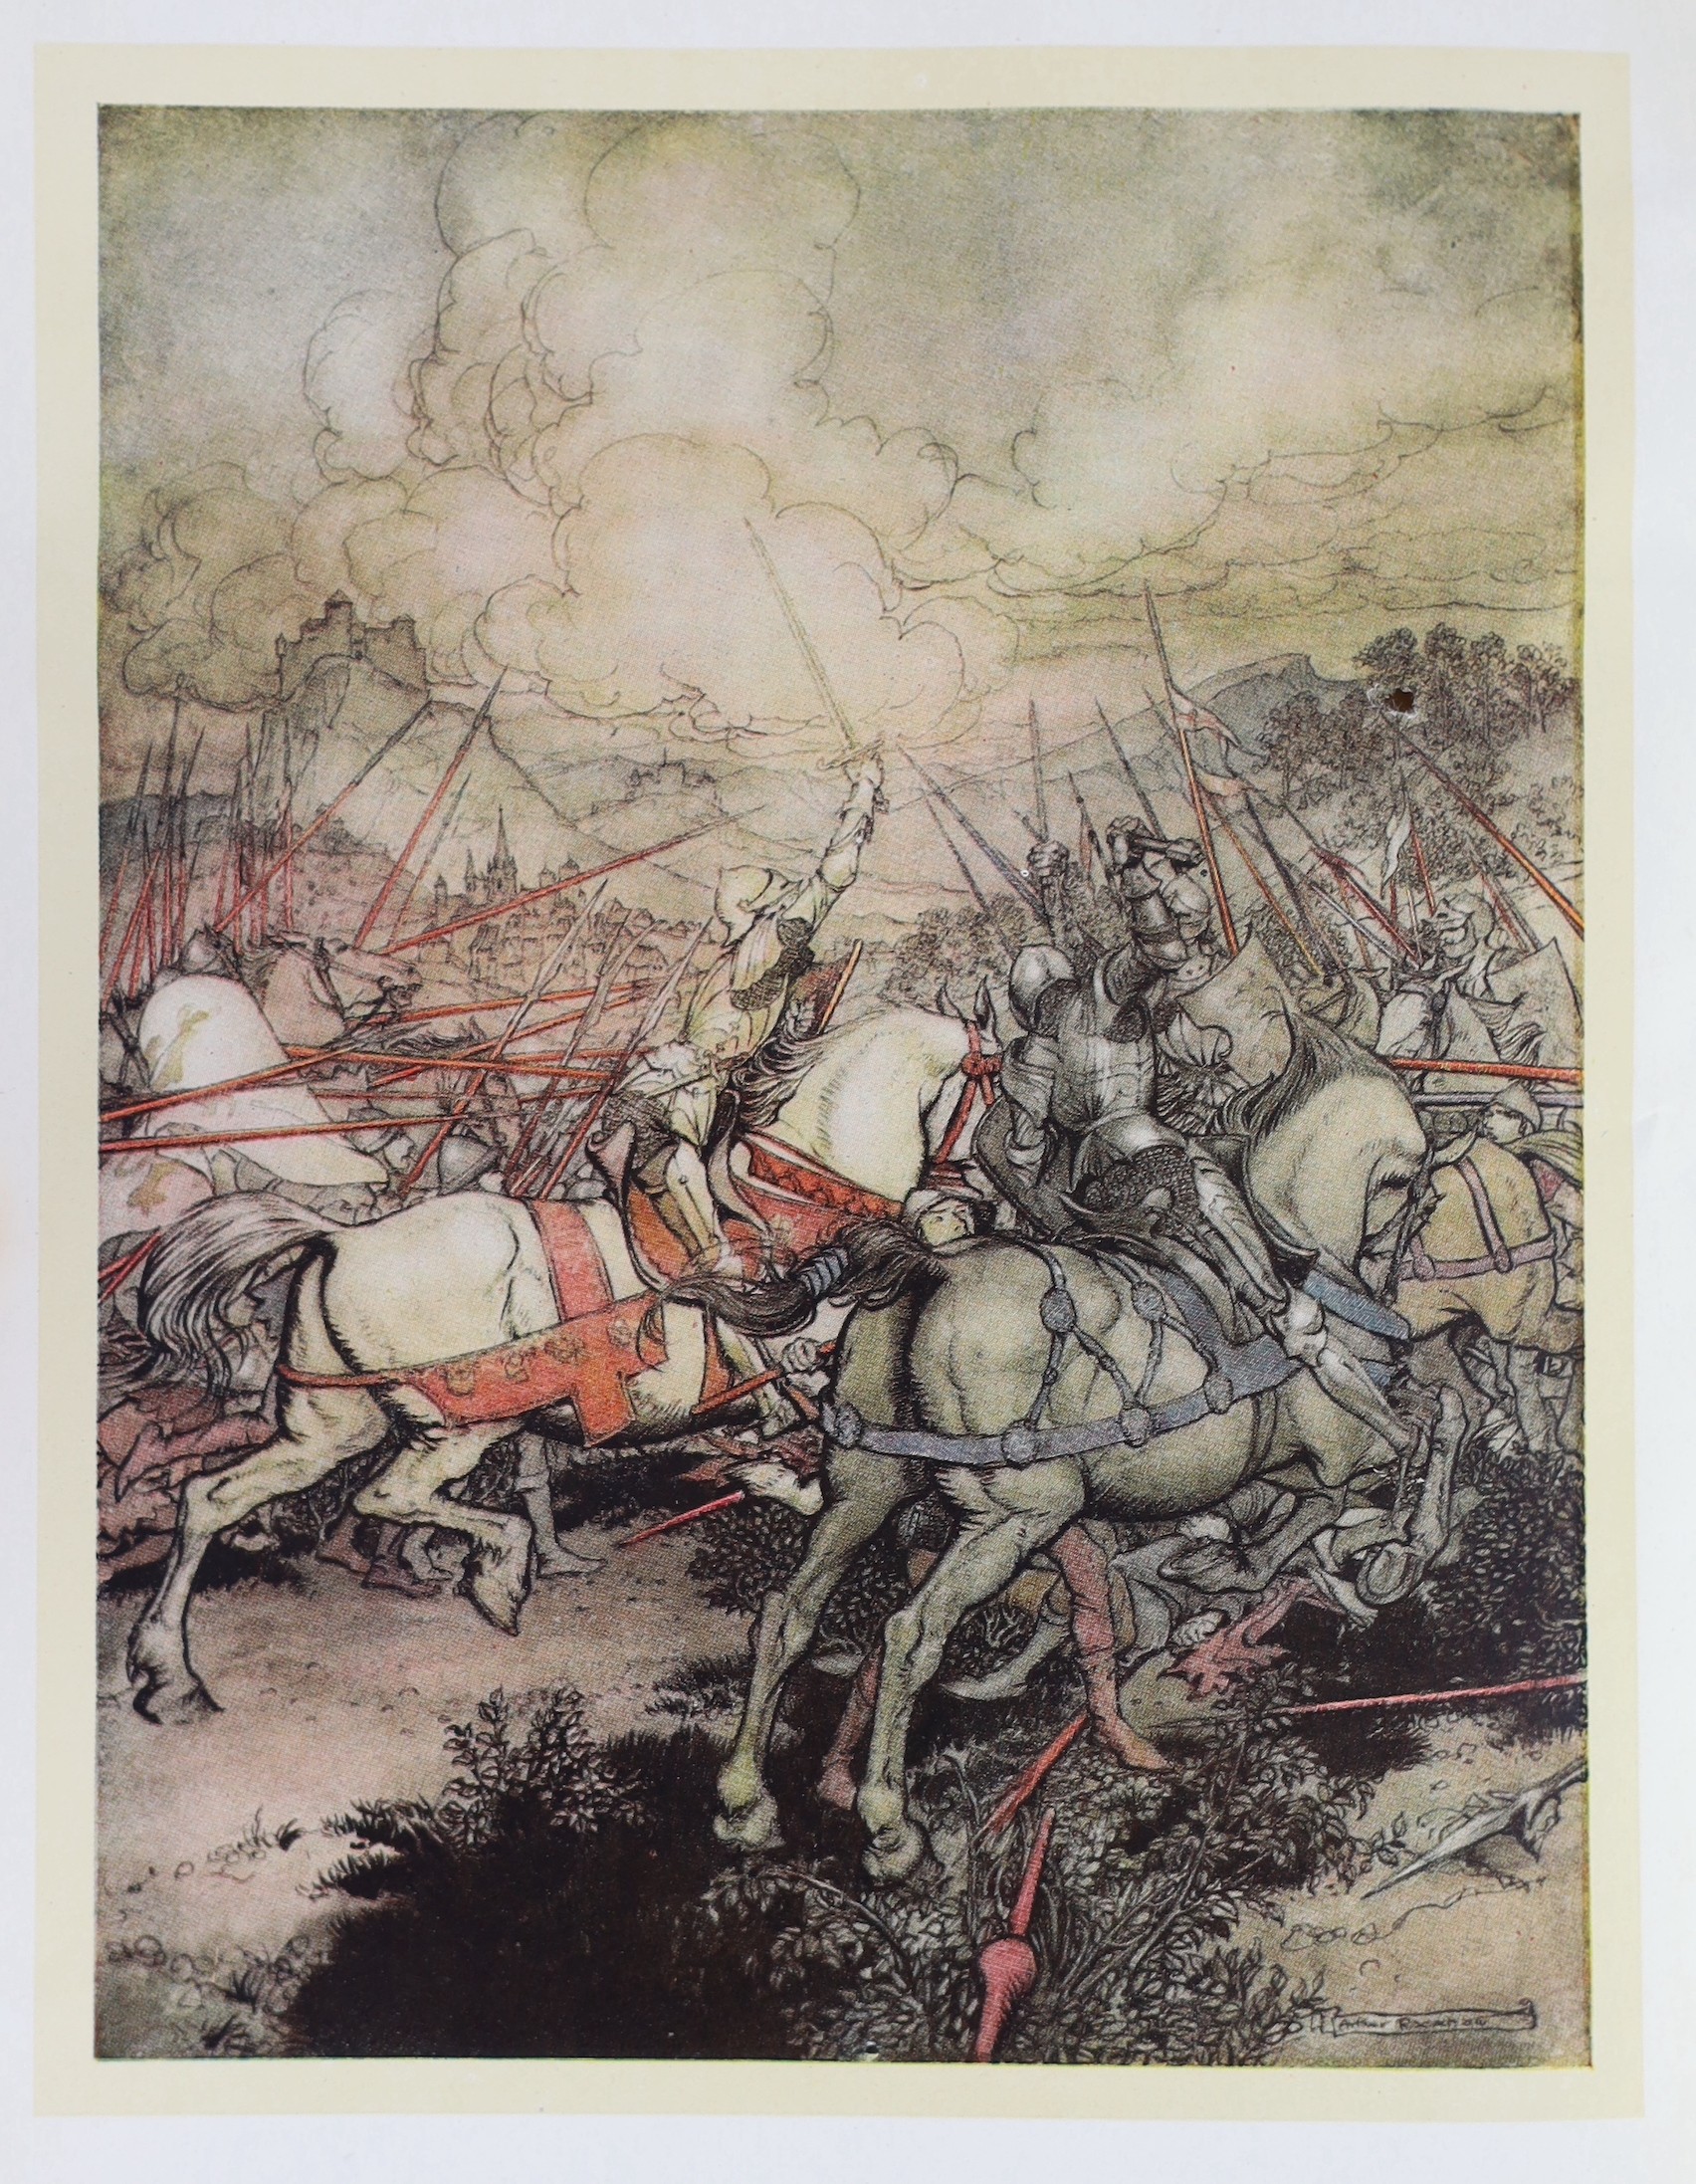 Malory, Thomas, Sir - [Le Morte Darthur]. ‘’The Romance of King Arthur’’, illustrated with 16 colour plates by Arthur Rackham (tears to contents page and pp.xv), New York, 1917 and Wagner, Richard - [The Ring of the Nibe